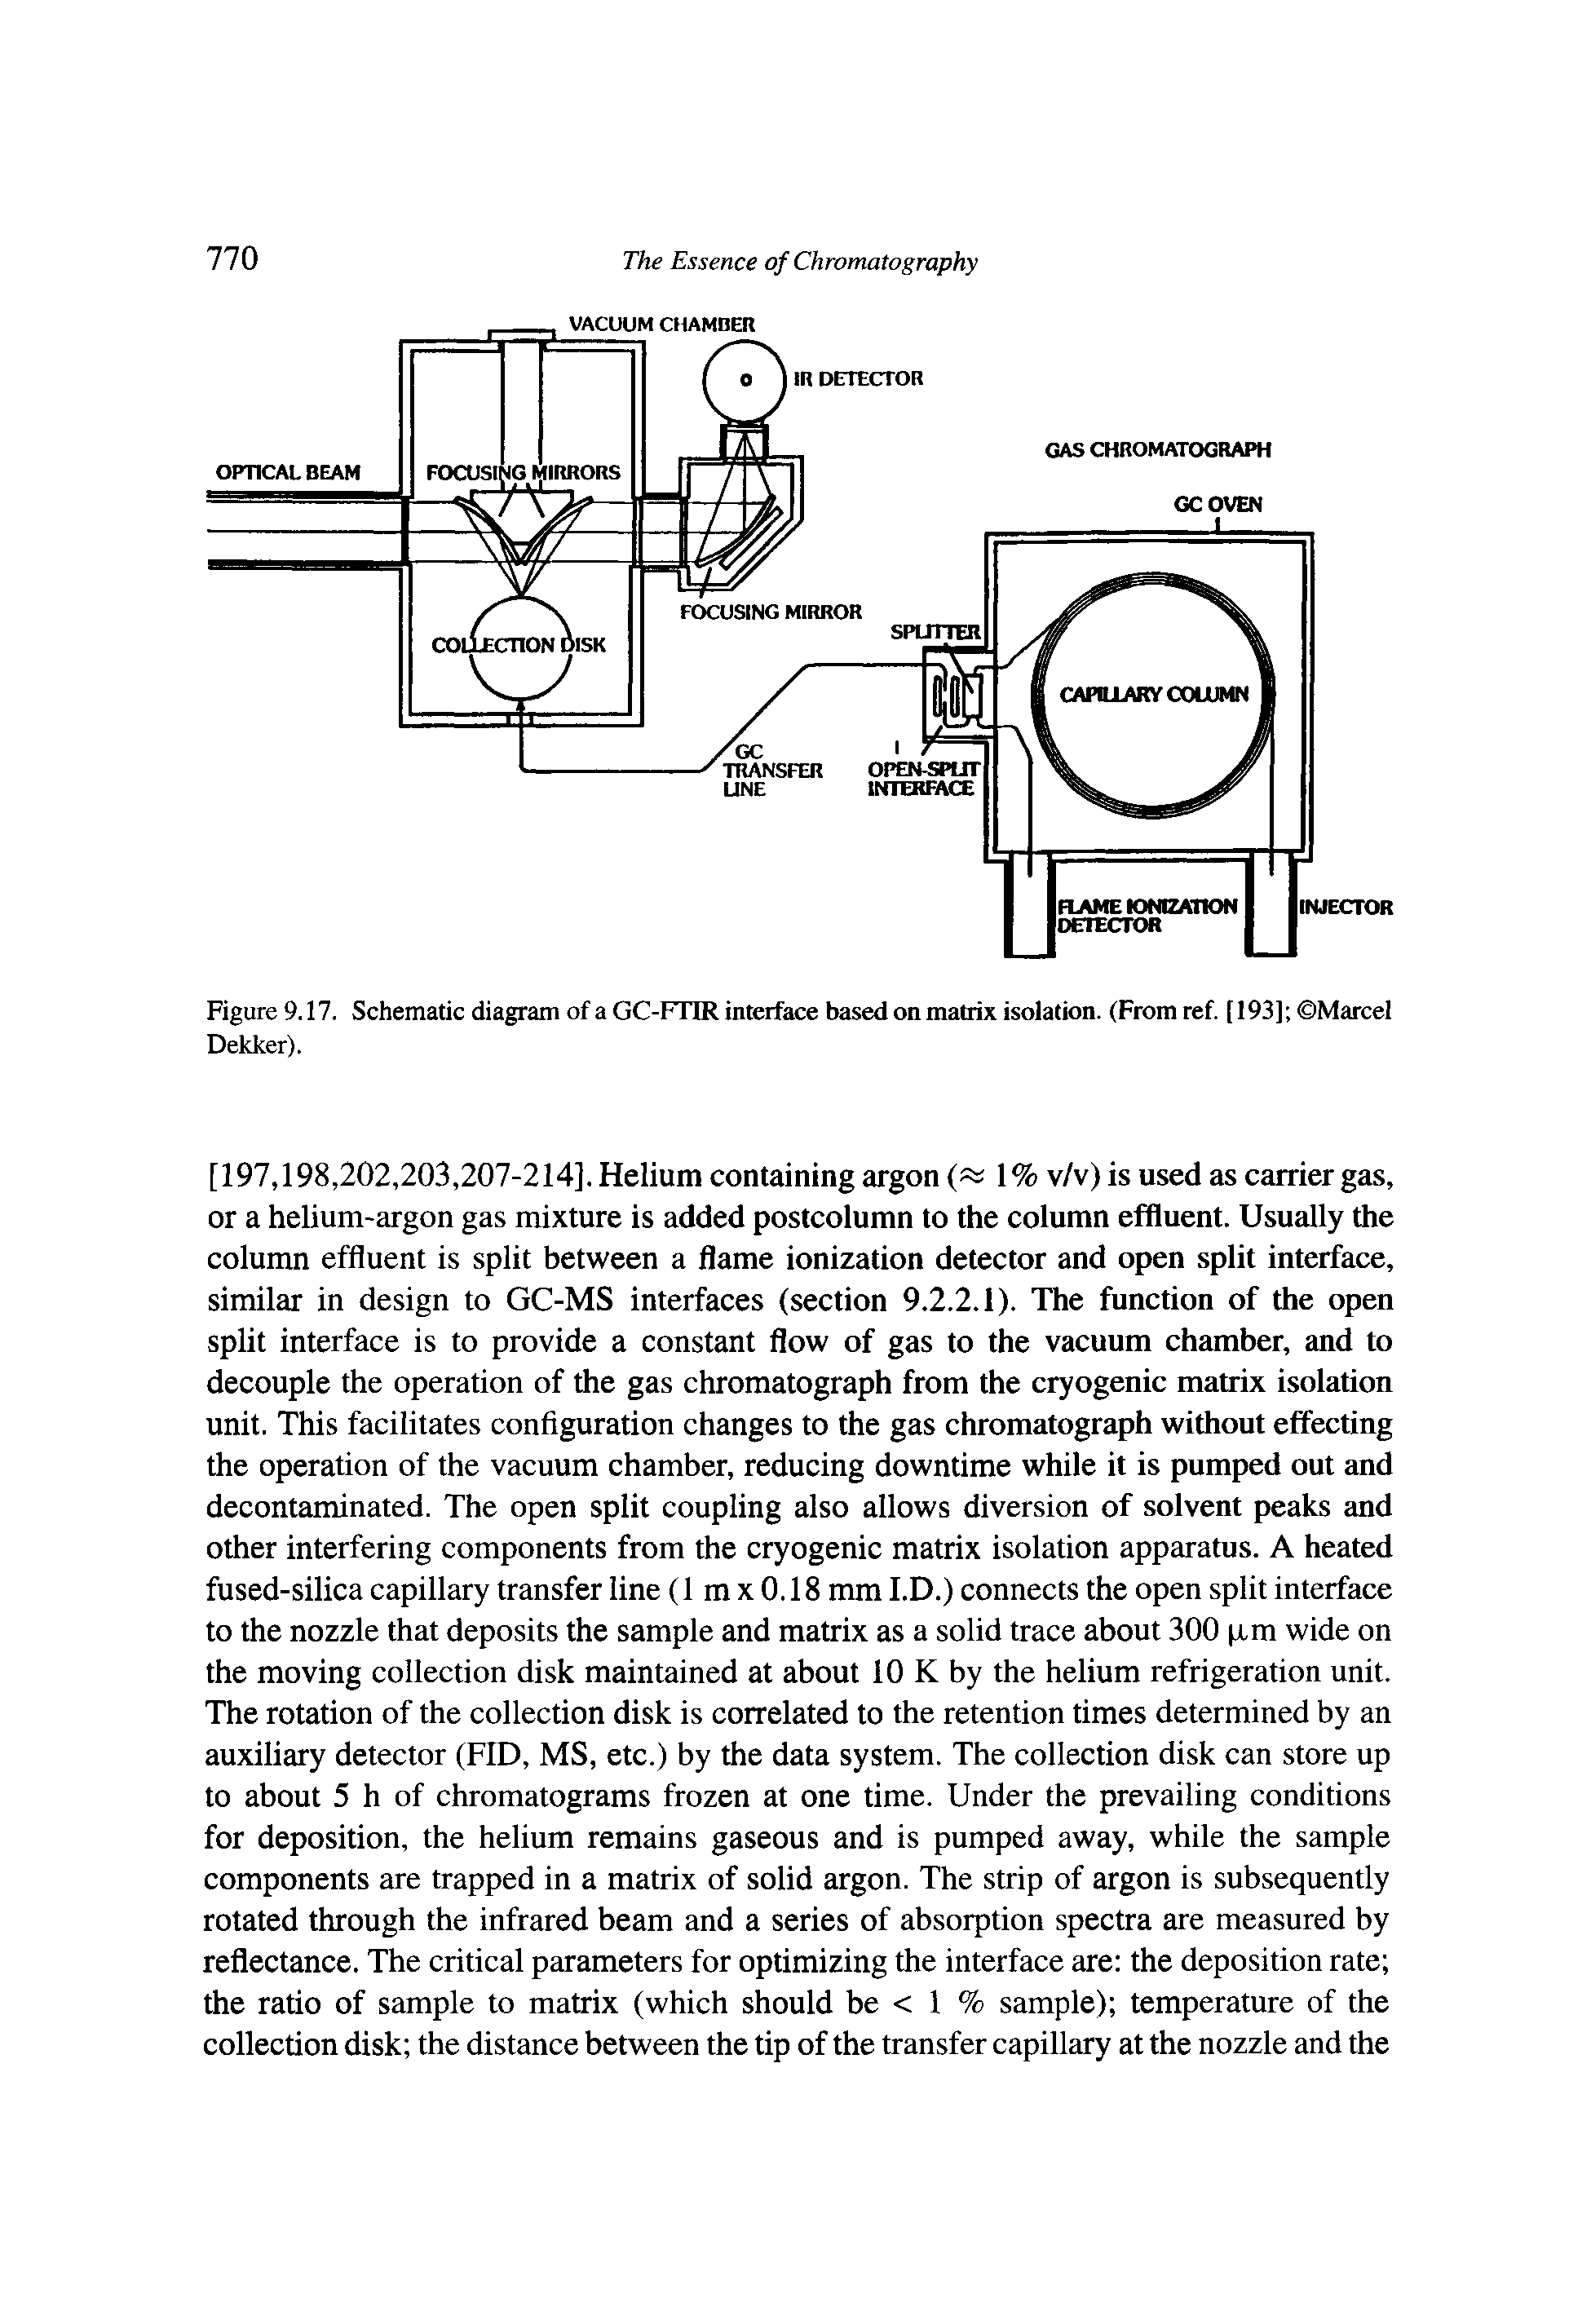 Figure 9.17. Schematic diagram of a GC-FTIR interface based on matrix isolation. (From ref. [193] Marcel...